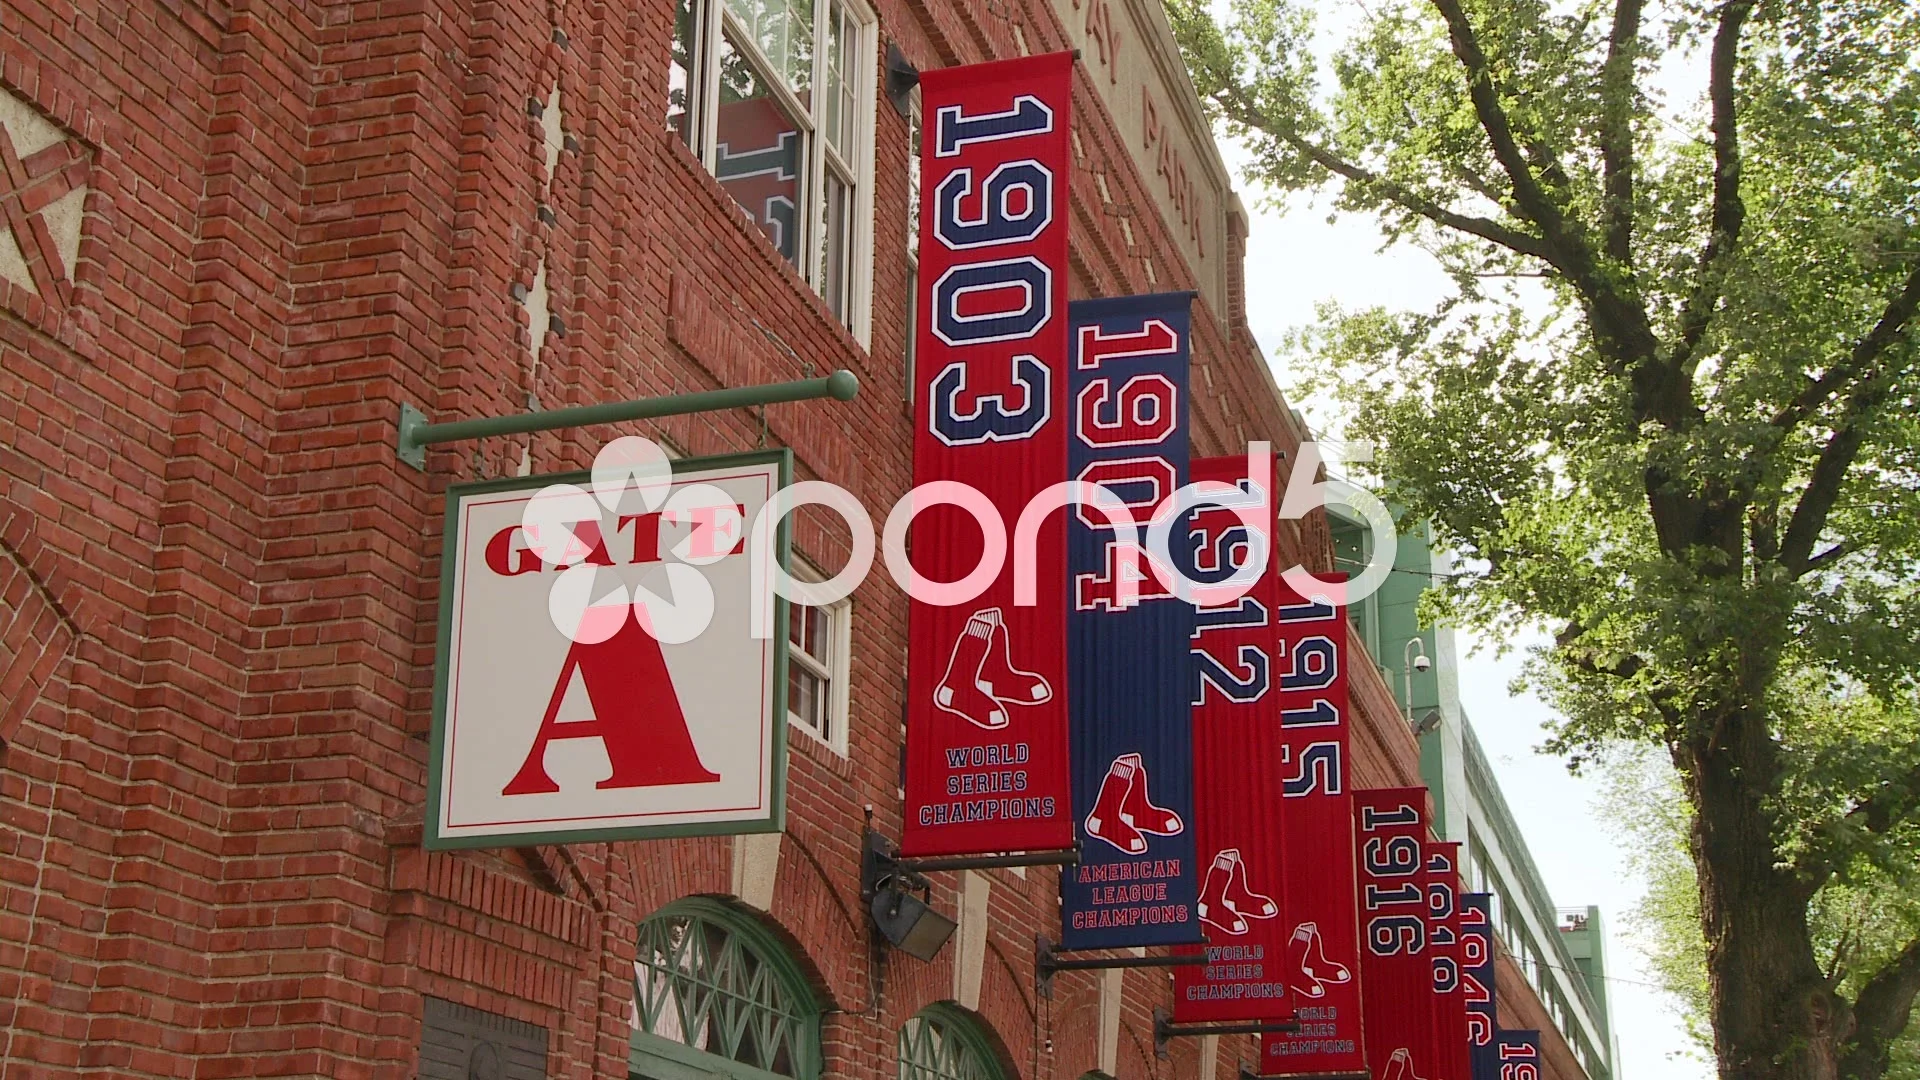 Championship Banners at Fenway Park Editorial Stock Photo - Image